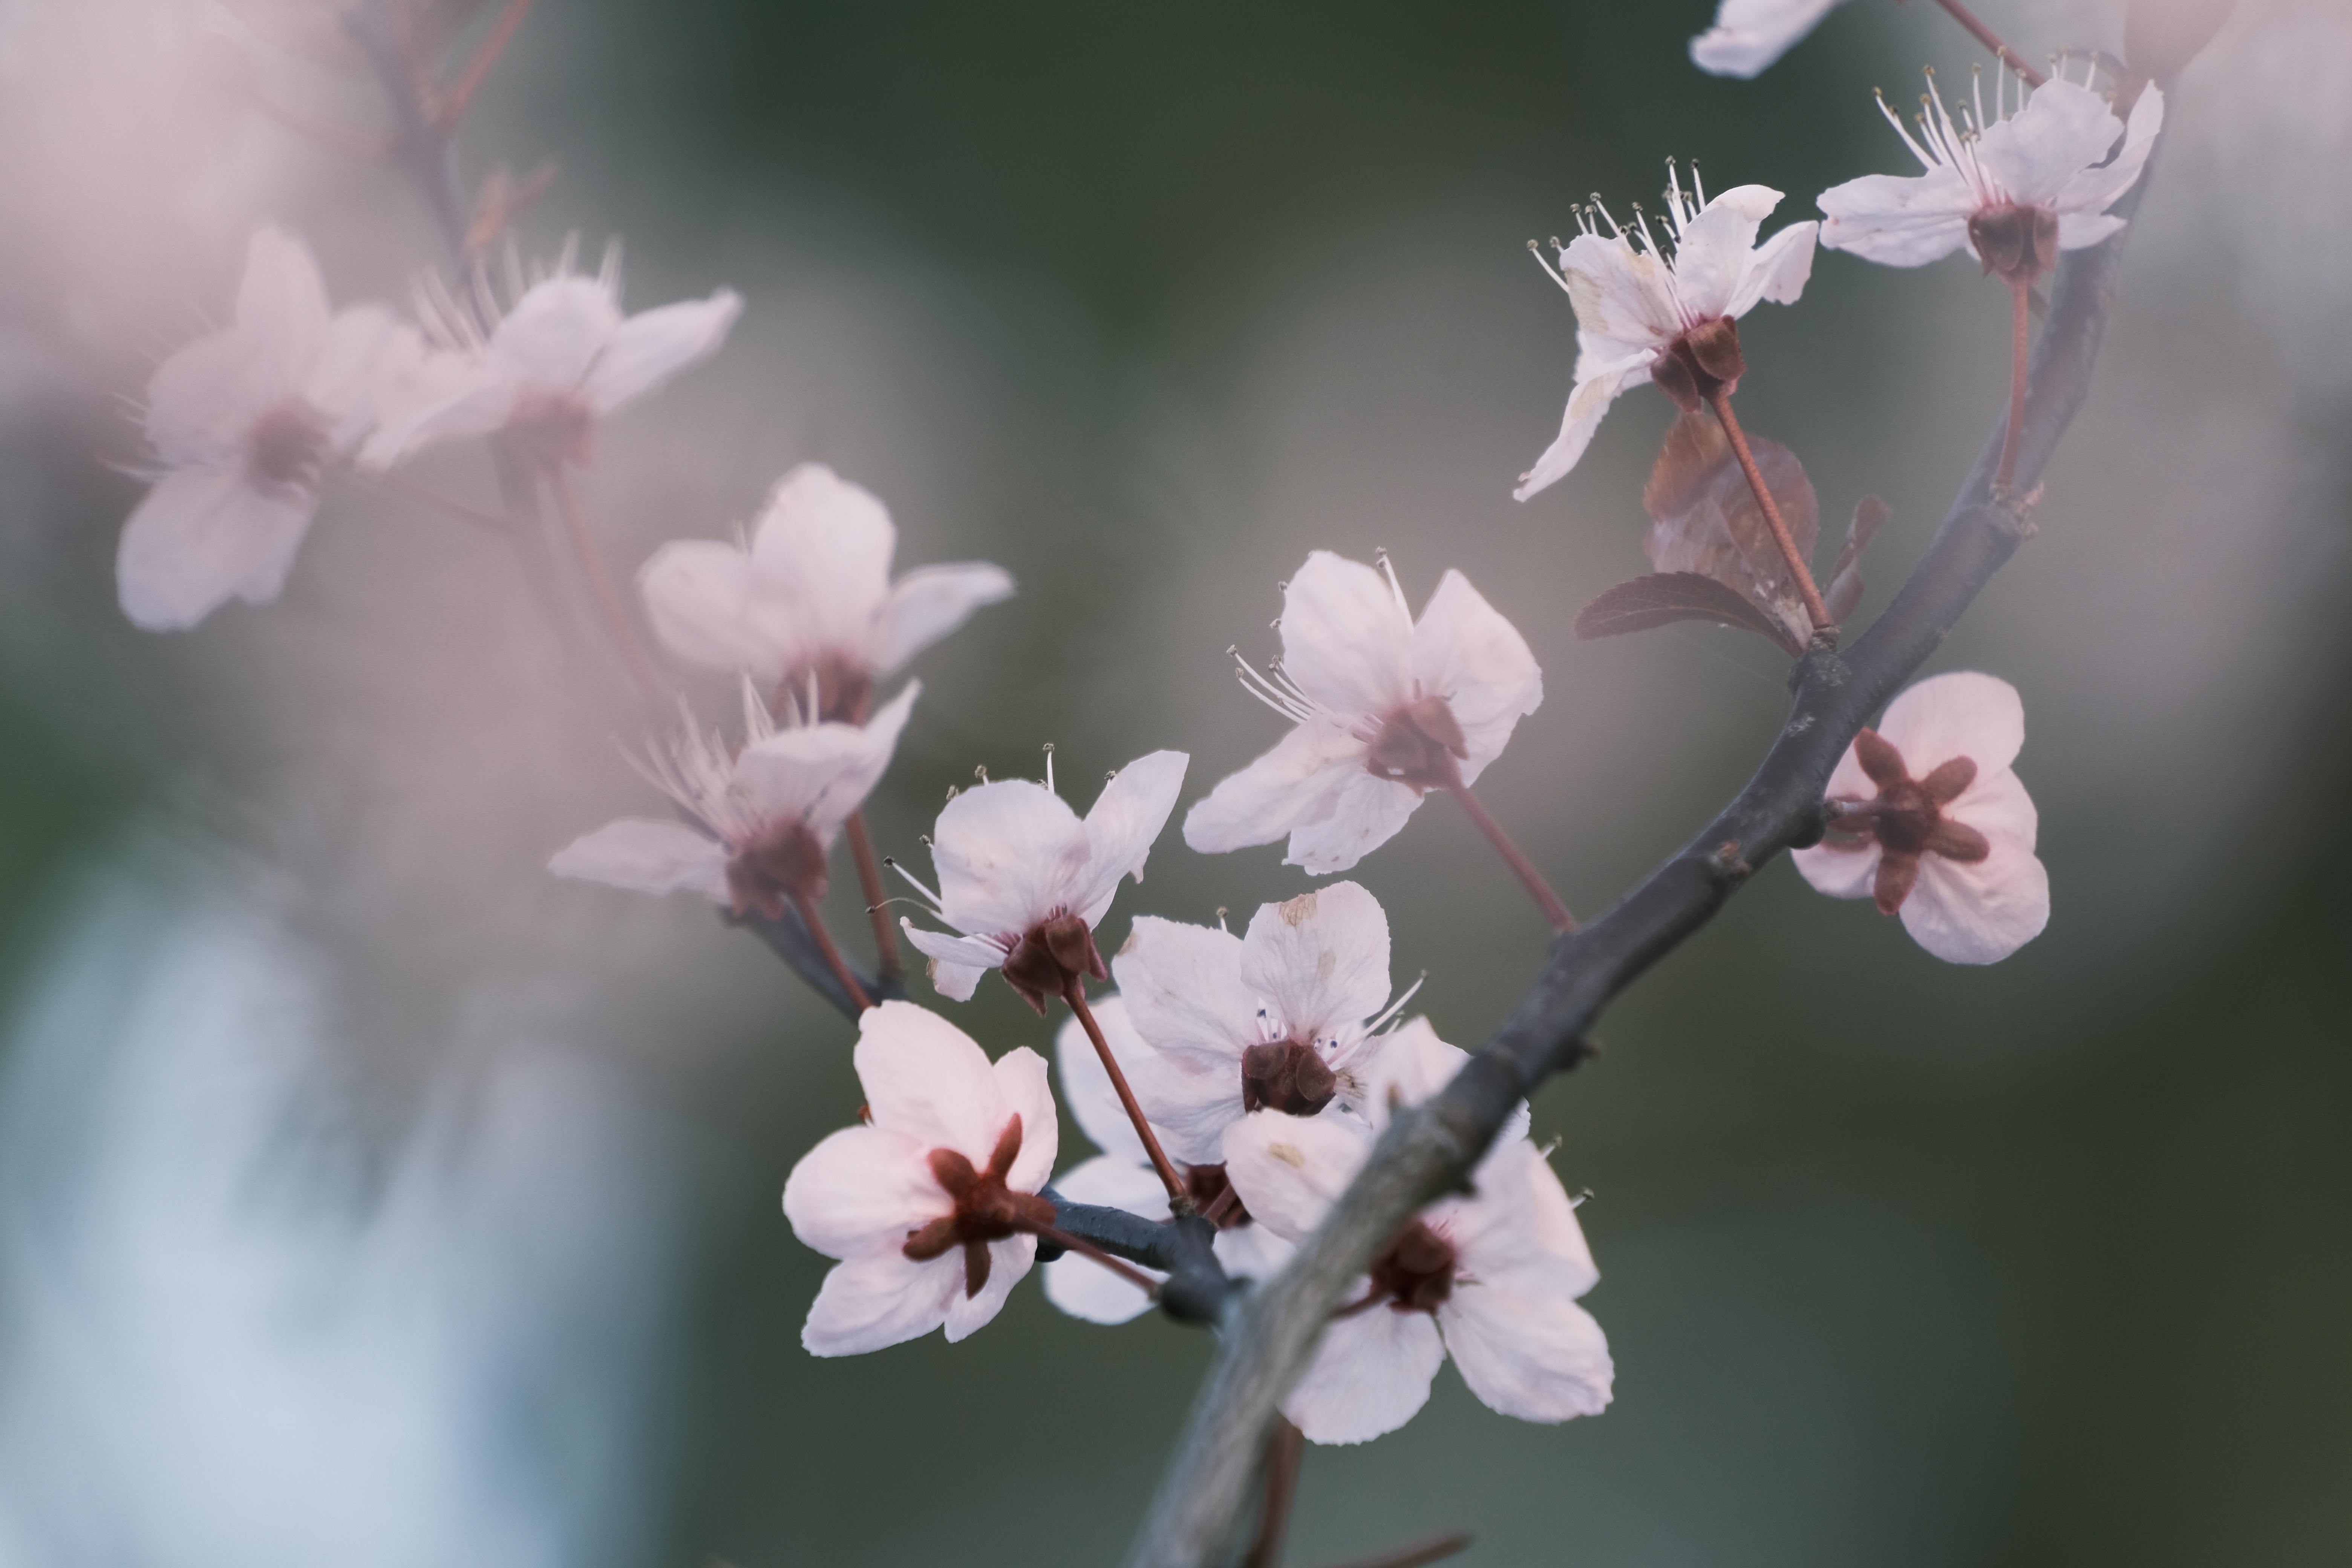 Blossom with the Fujifilm X-S10, 1/200s, f/6.3, ISO400, 300mm, 450mm equivalent